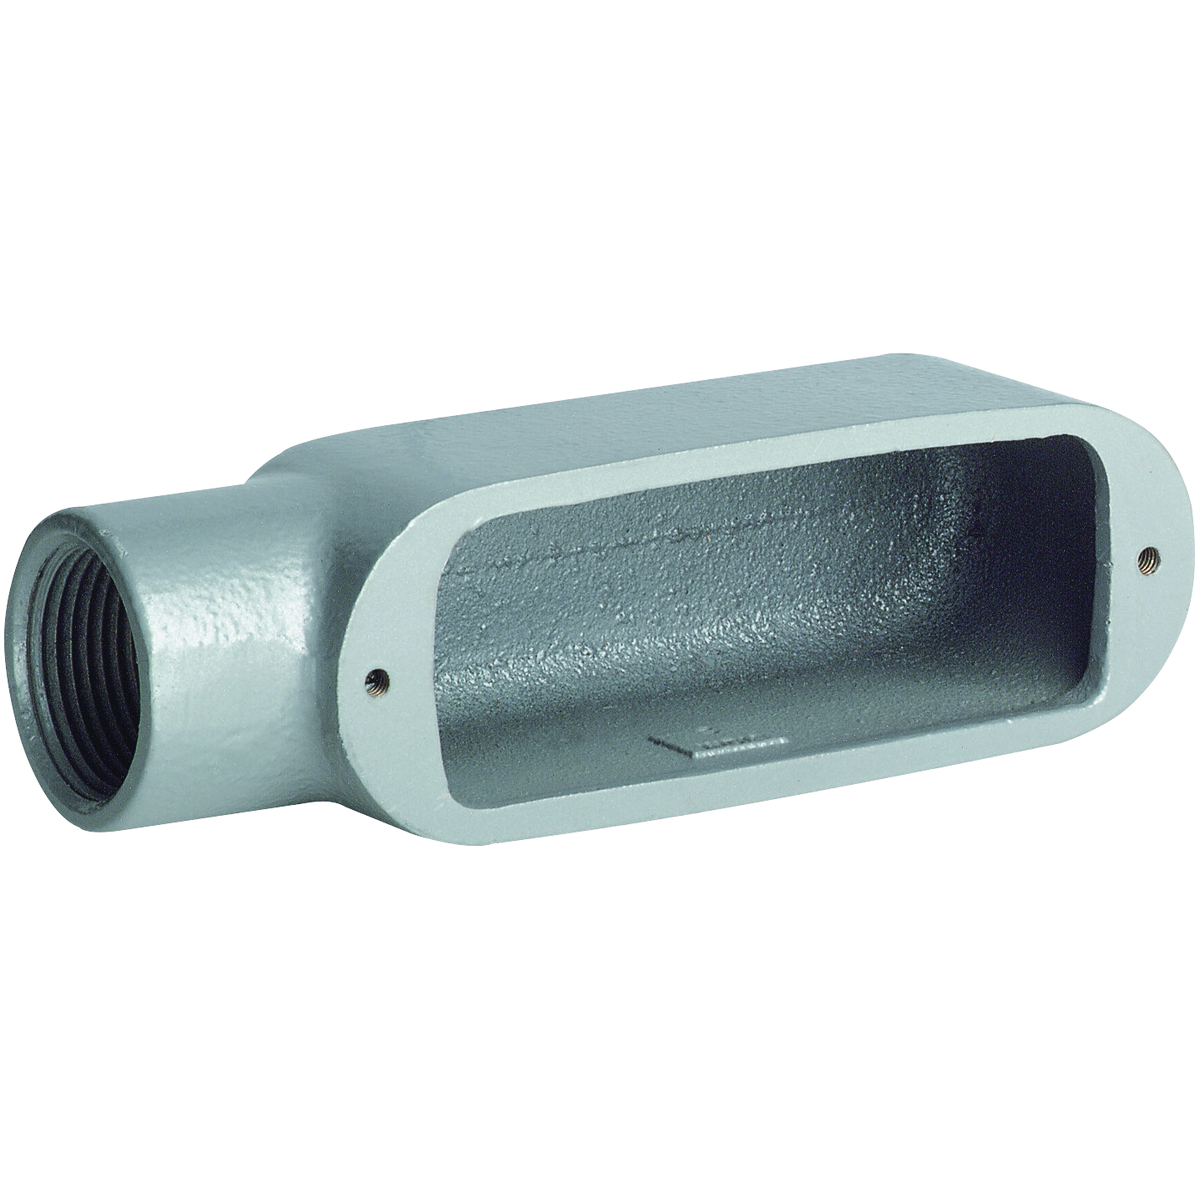 O SERIES/DURALOY 5 SERIES - ALUMINUM CONDUIT BODY - E TYPE - HUB SIZE1/2 INCH - VOLUME 4.0 CUBIC INCHES